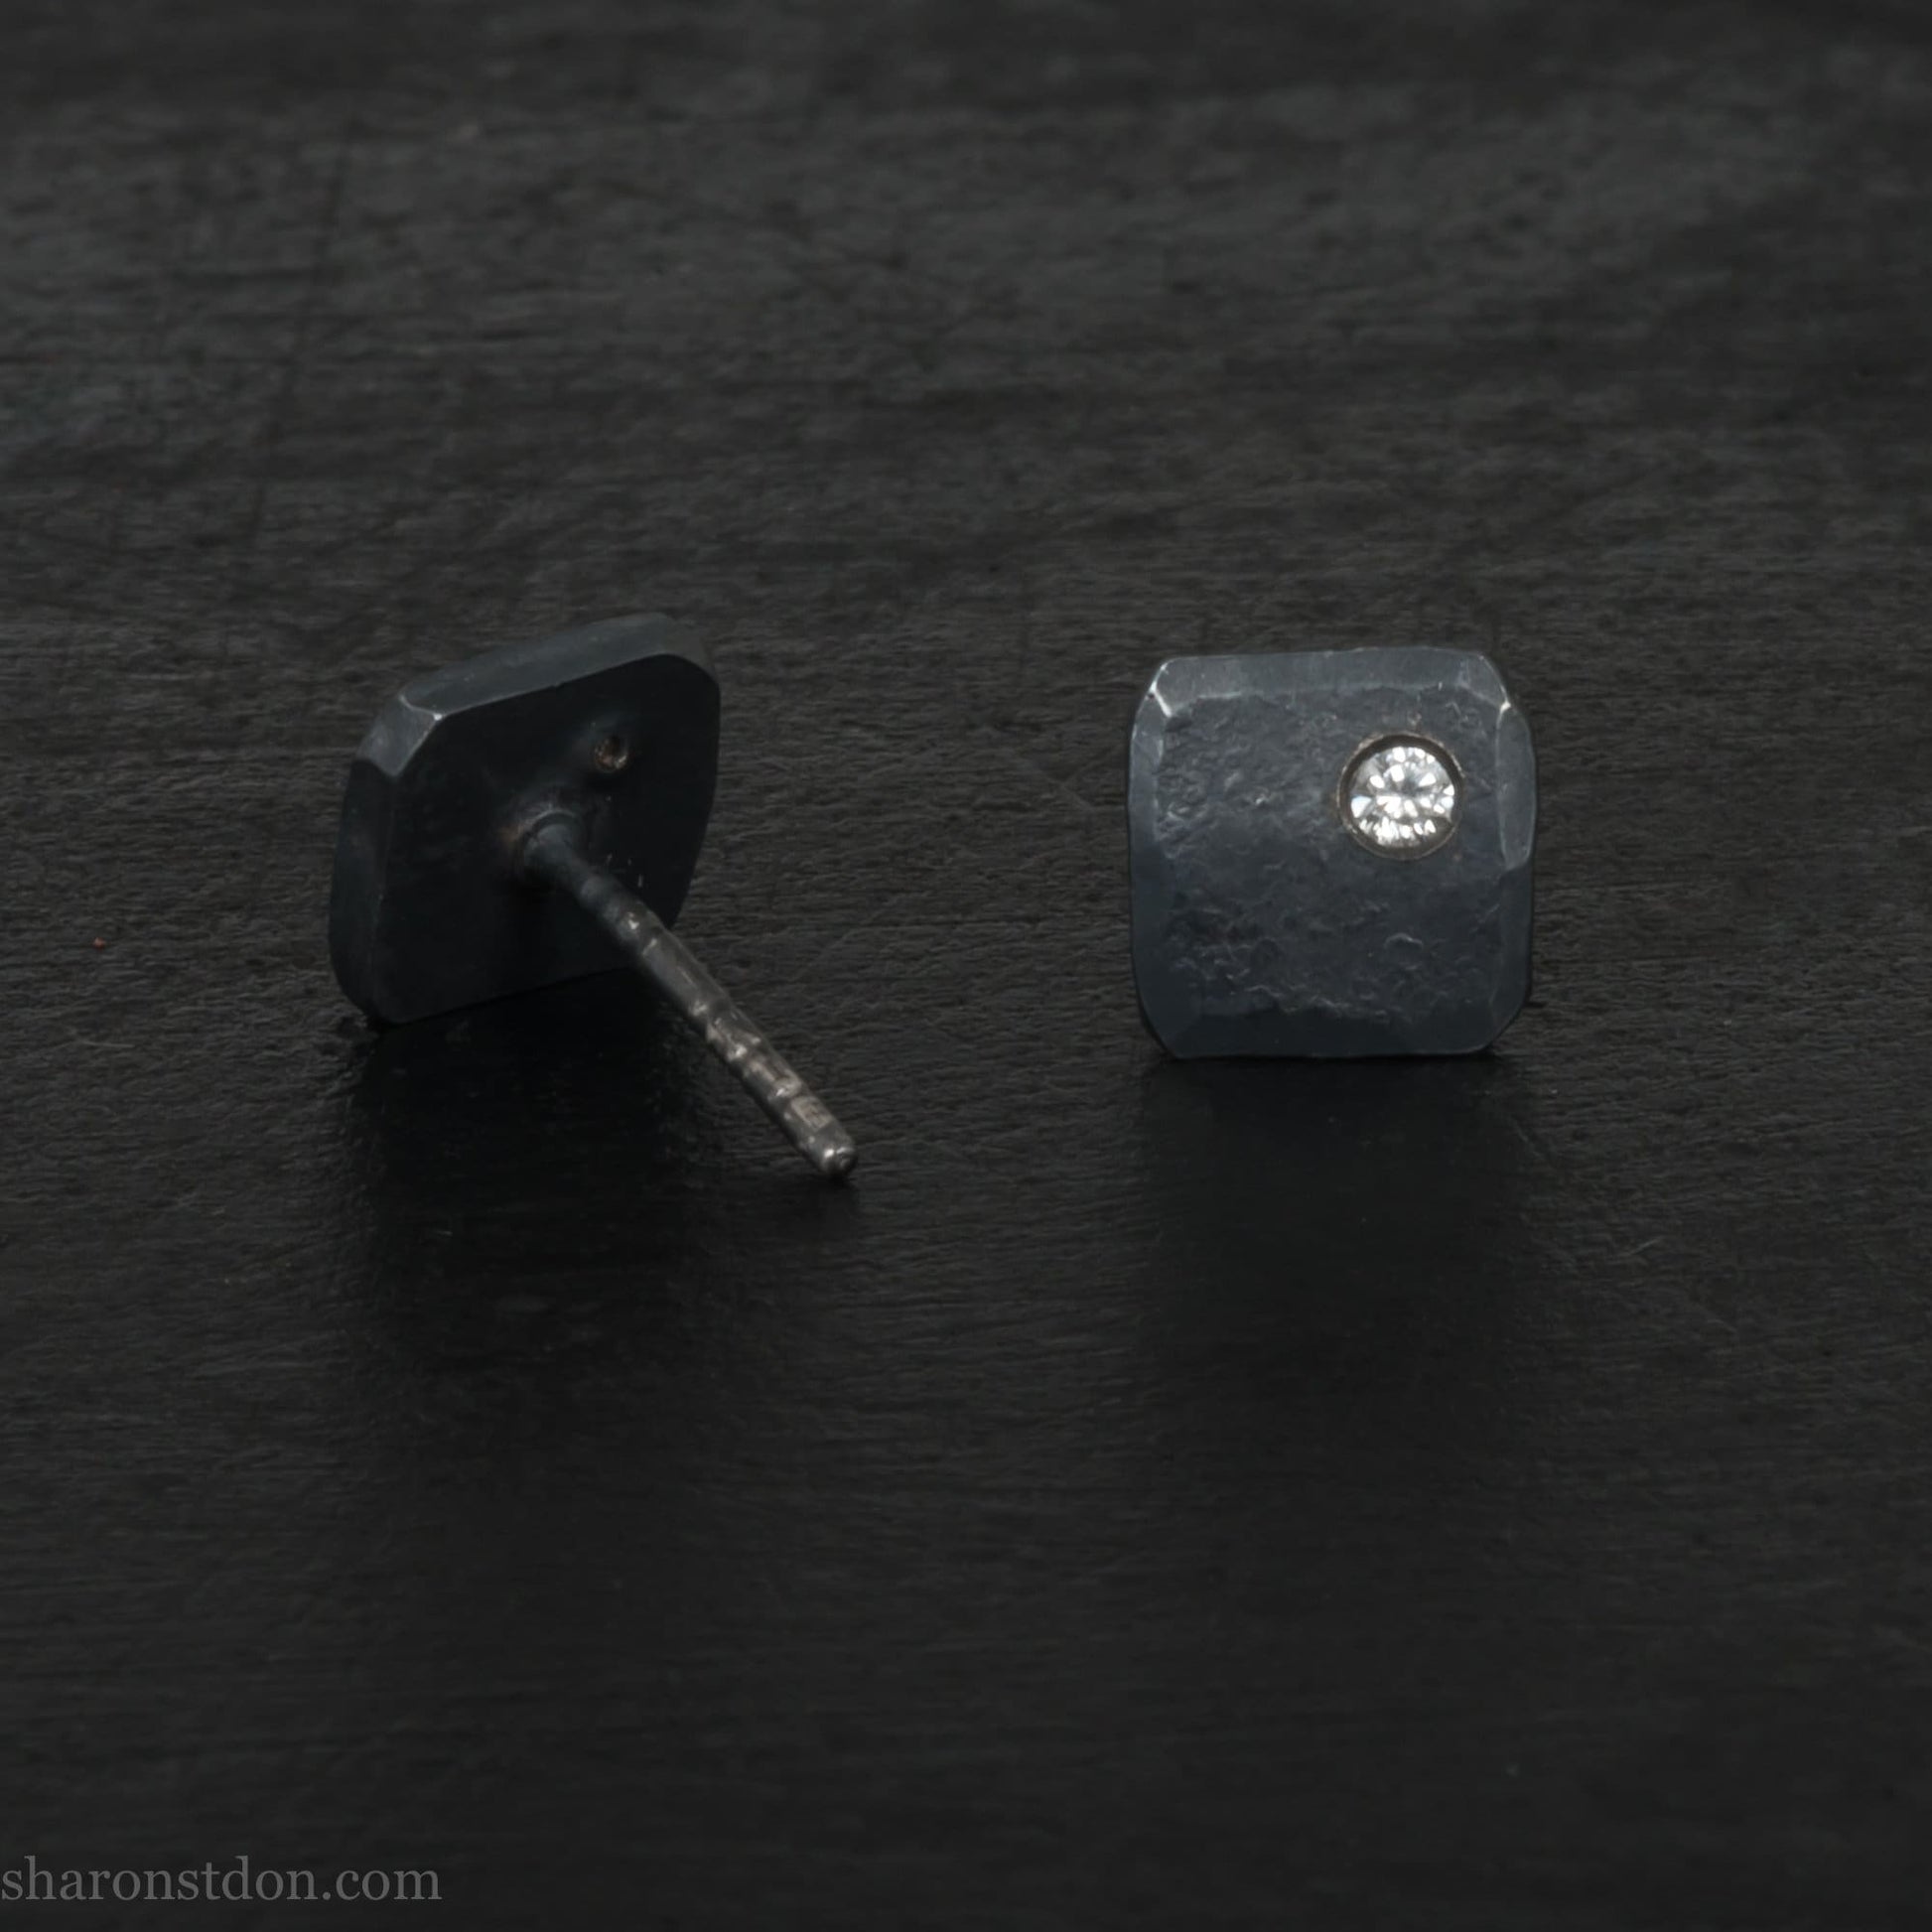 Handmade 925 sterling silver stud earrings with imitation diamond gemstone in the corner. Oxidized black, small square stud earrings made by Sharon SaintDon in North America. 7mm x 7mm x 1.5mm